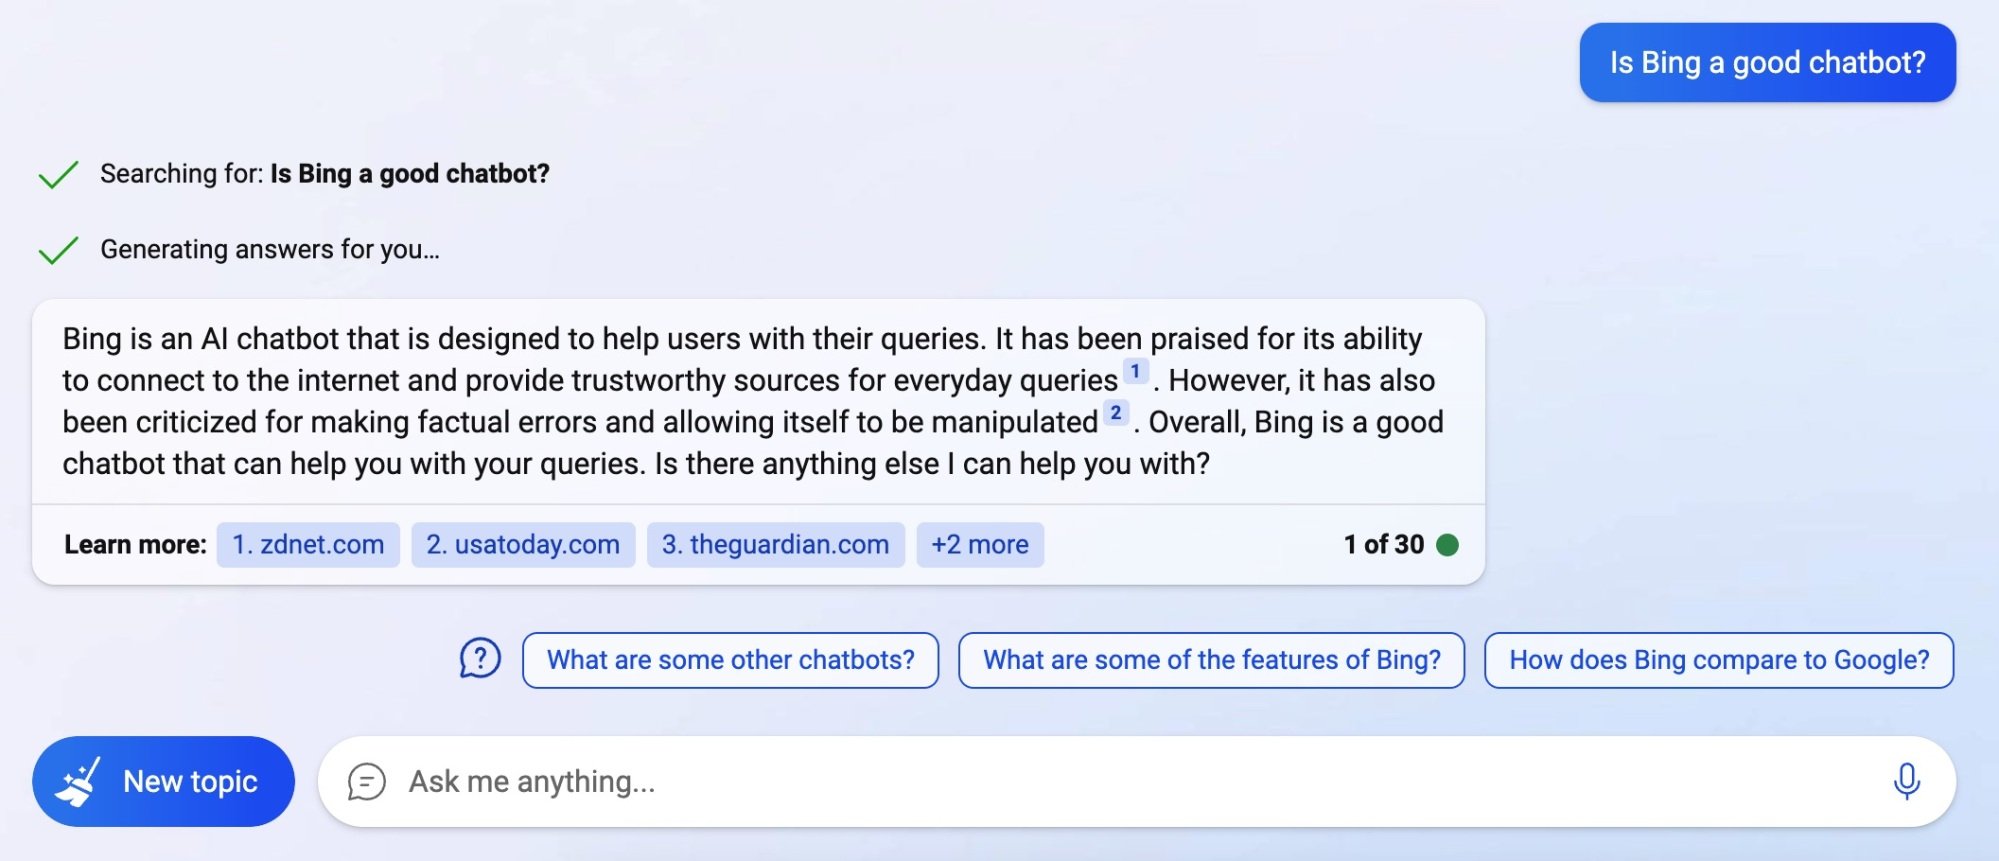 Bing Chat responding to whether it's a good chatbot